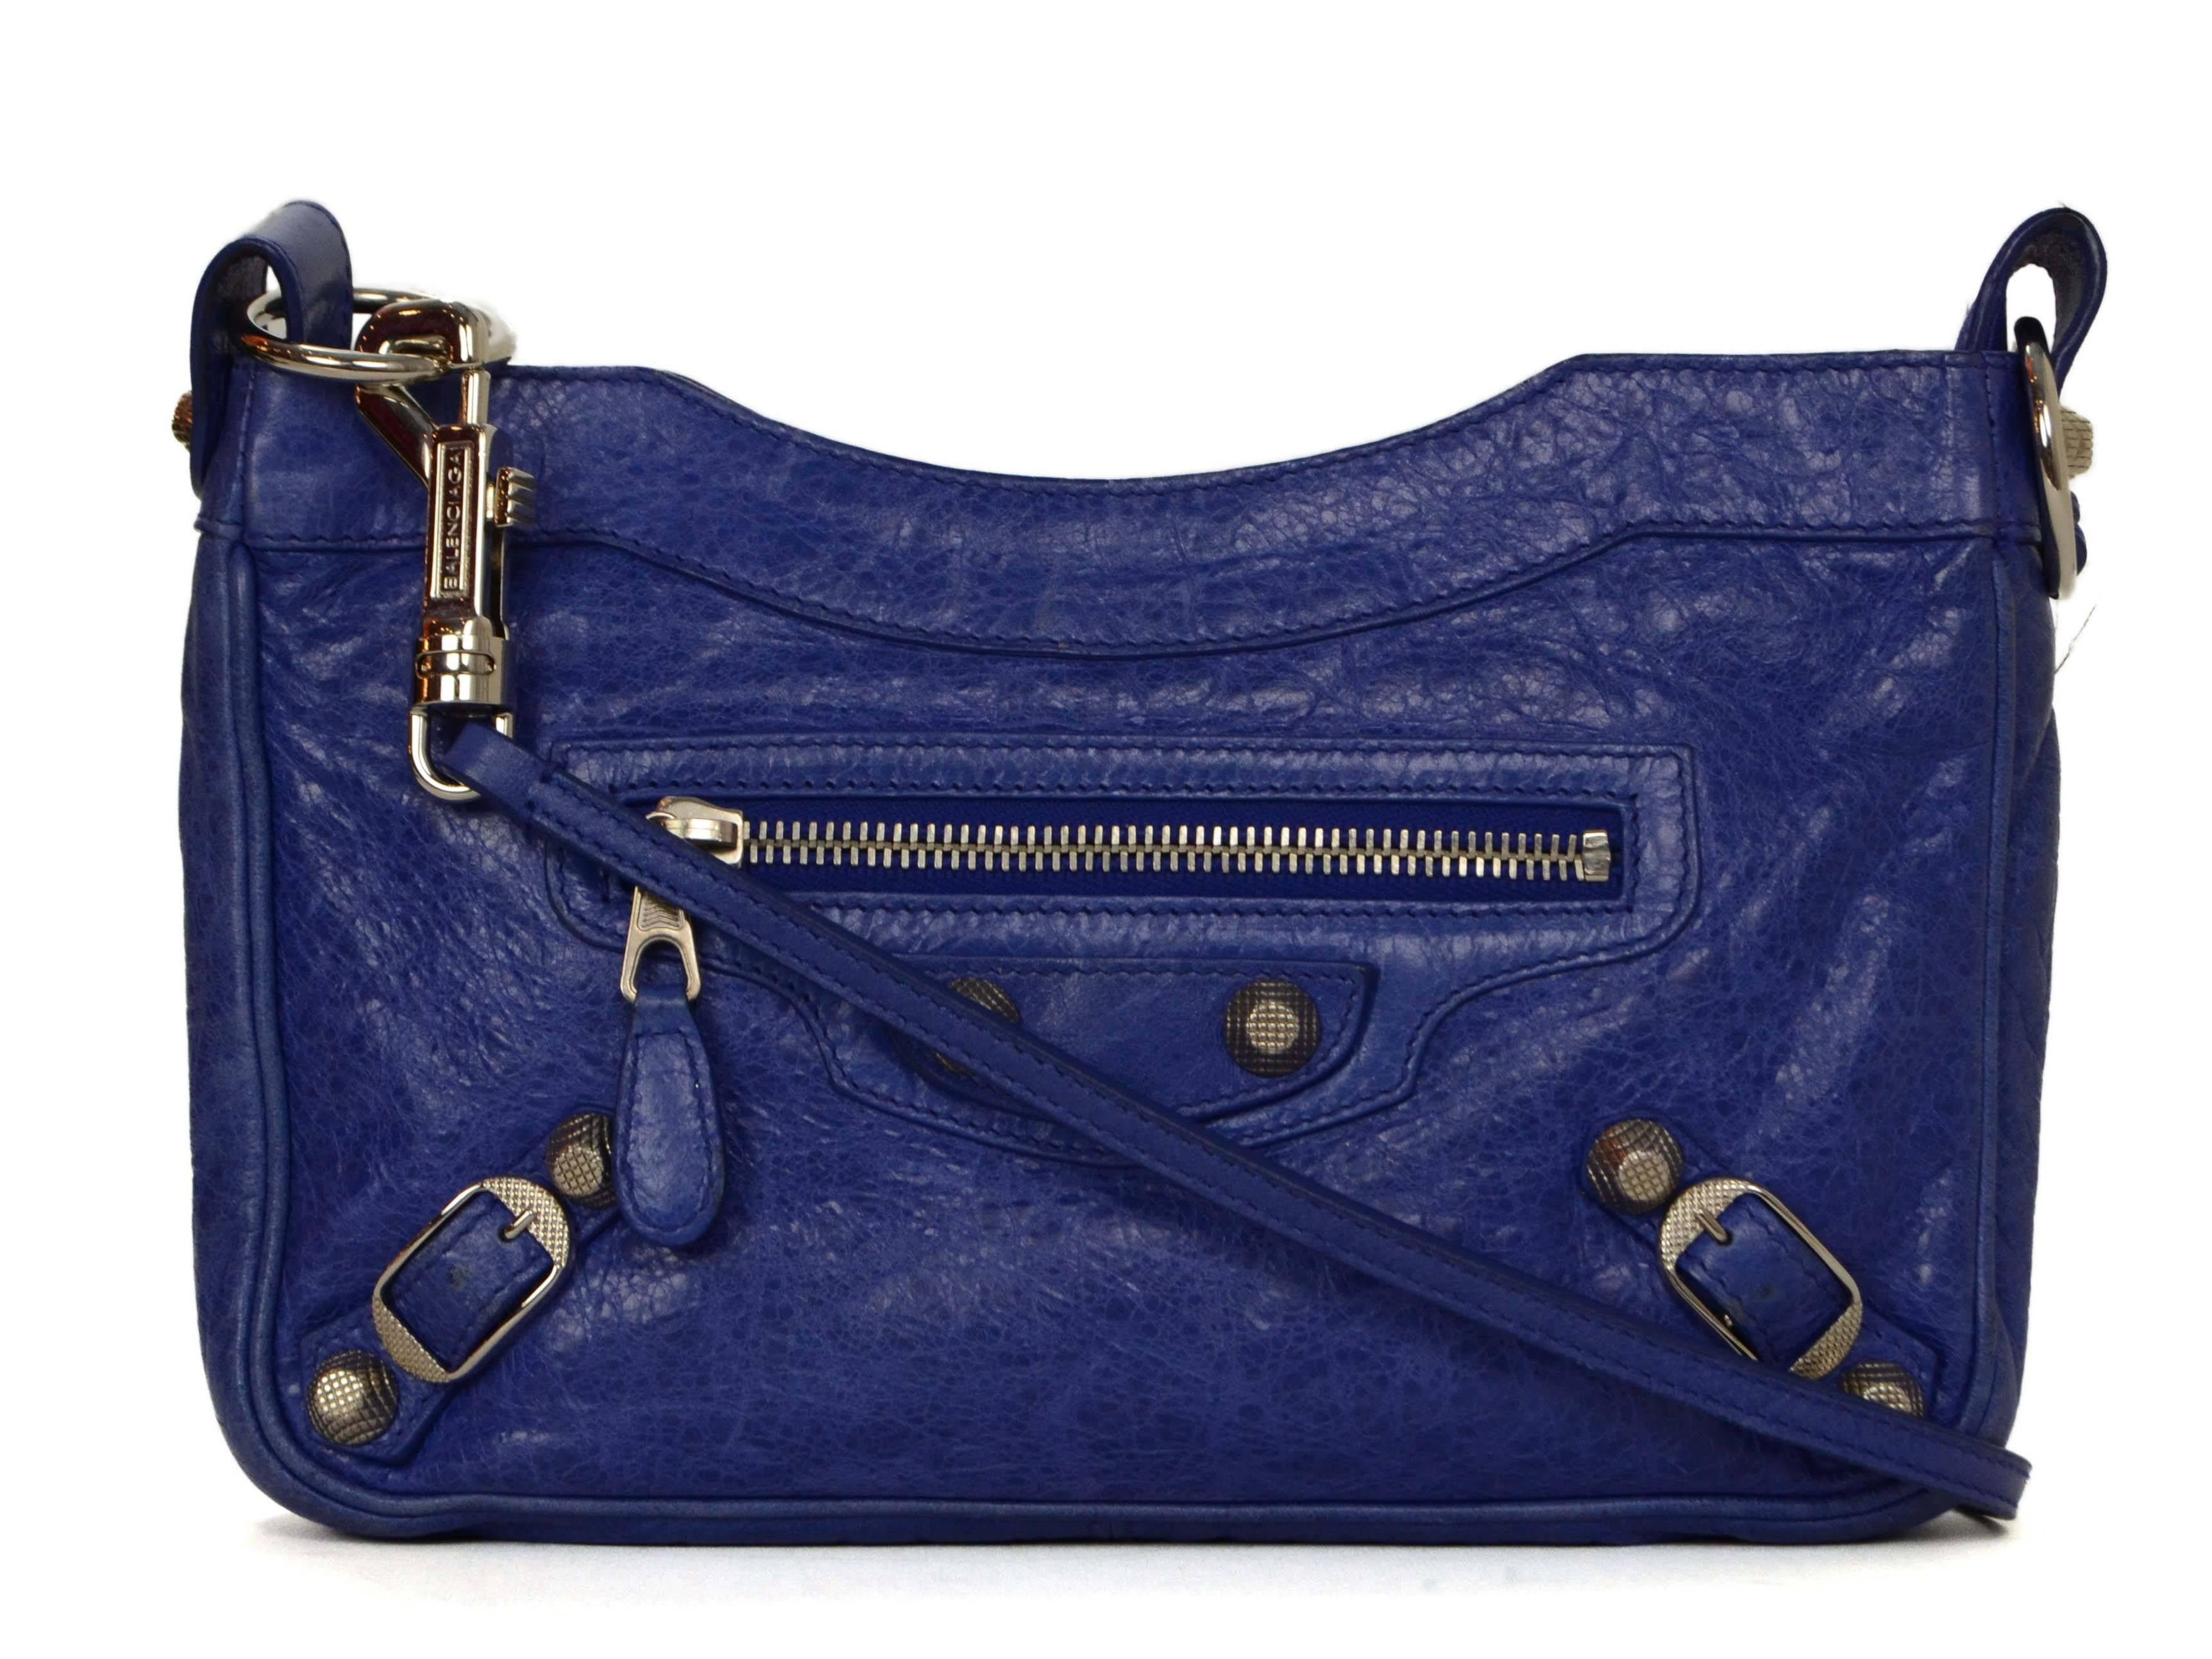 Features silvertone giant hardware and detachable crossbody strap

-Made In: Italy
-Color: Cobalt blue
-Hardware: Silvertone
-Materials: Agneau lambskin leather
-Lining: Black canvas-blend textile
-Closure/Opening: Zip top
-Exterior Pockets: